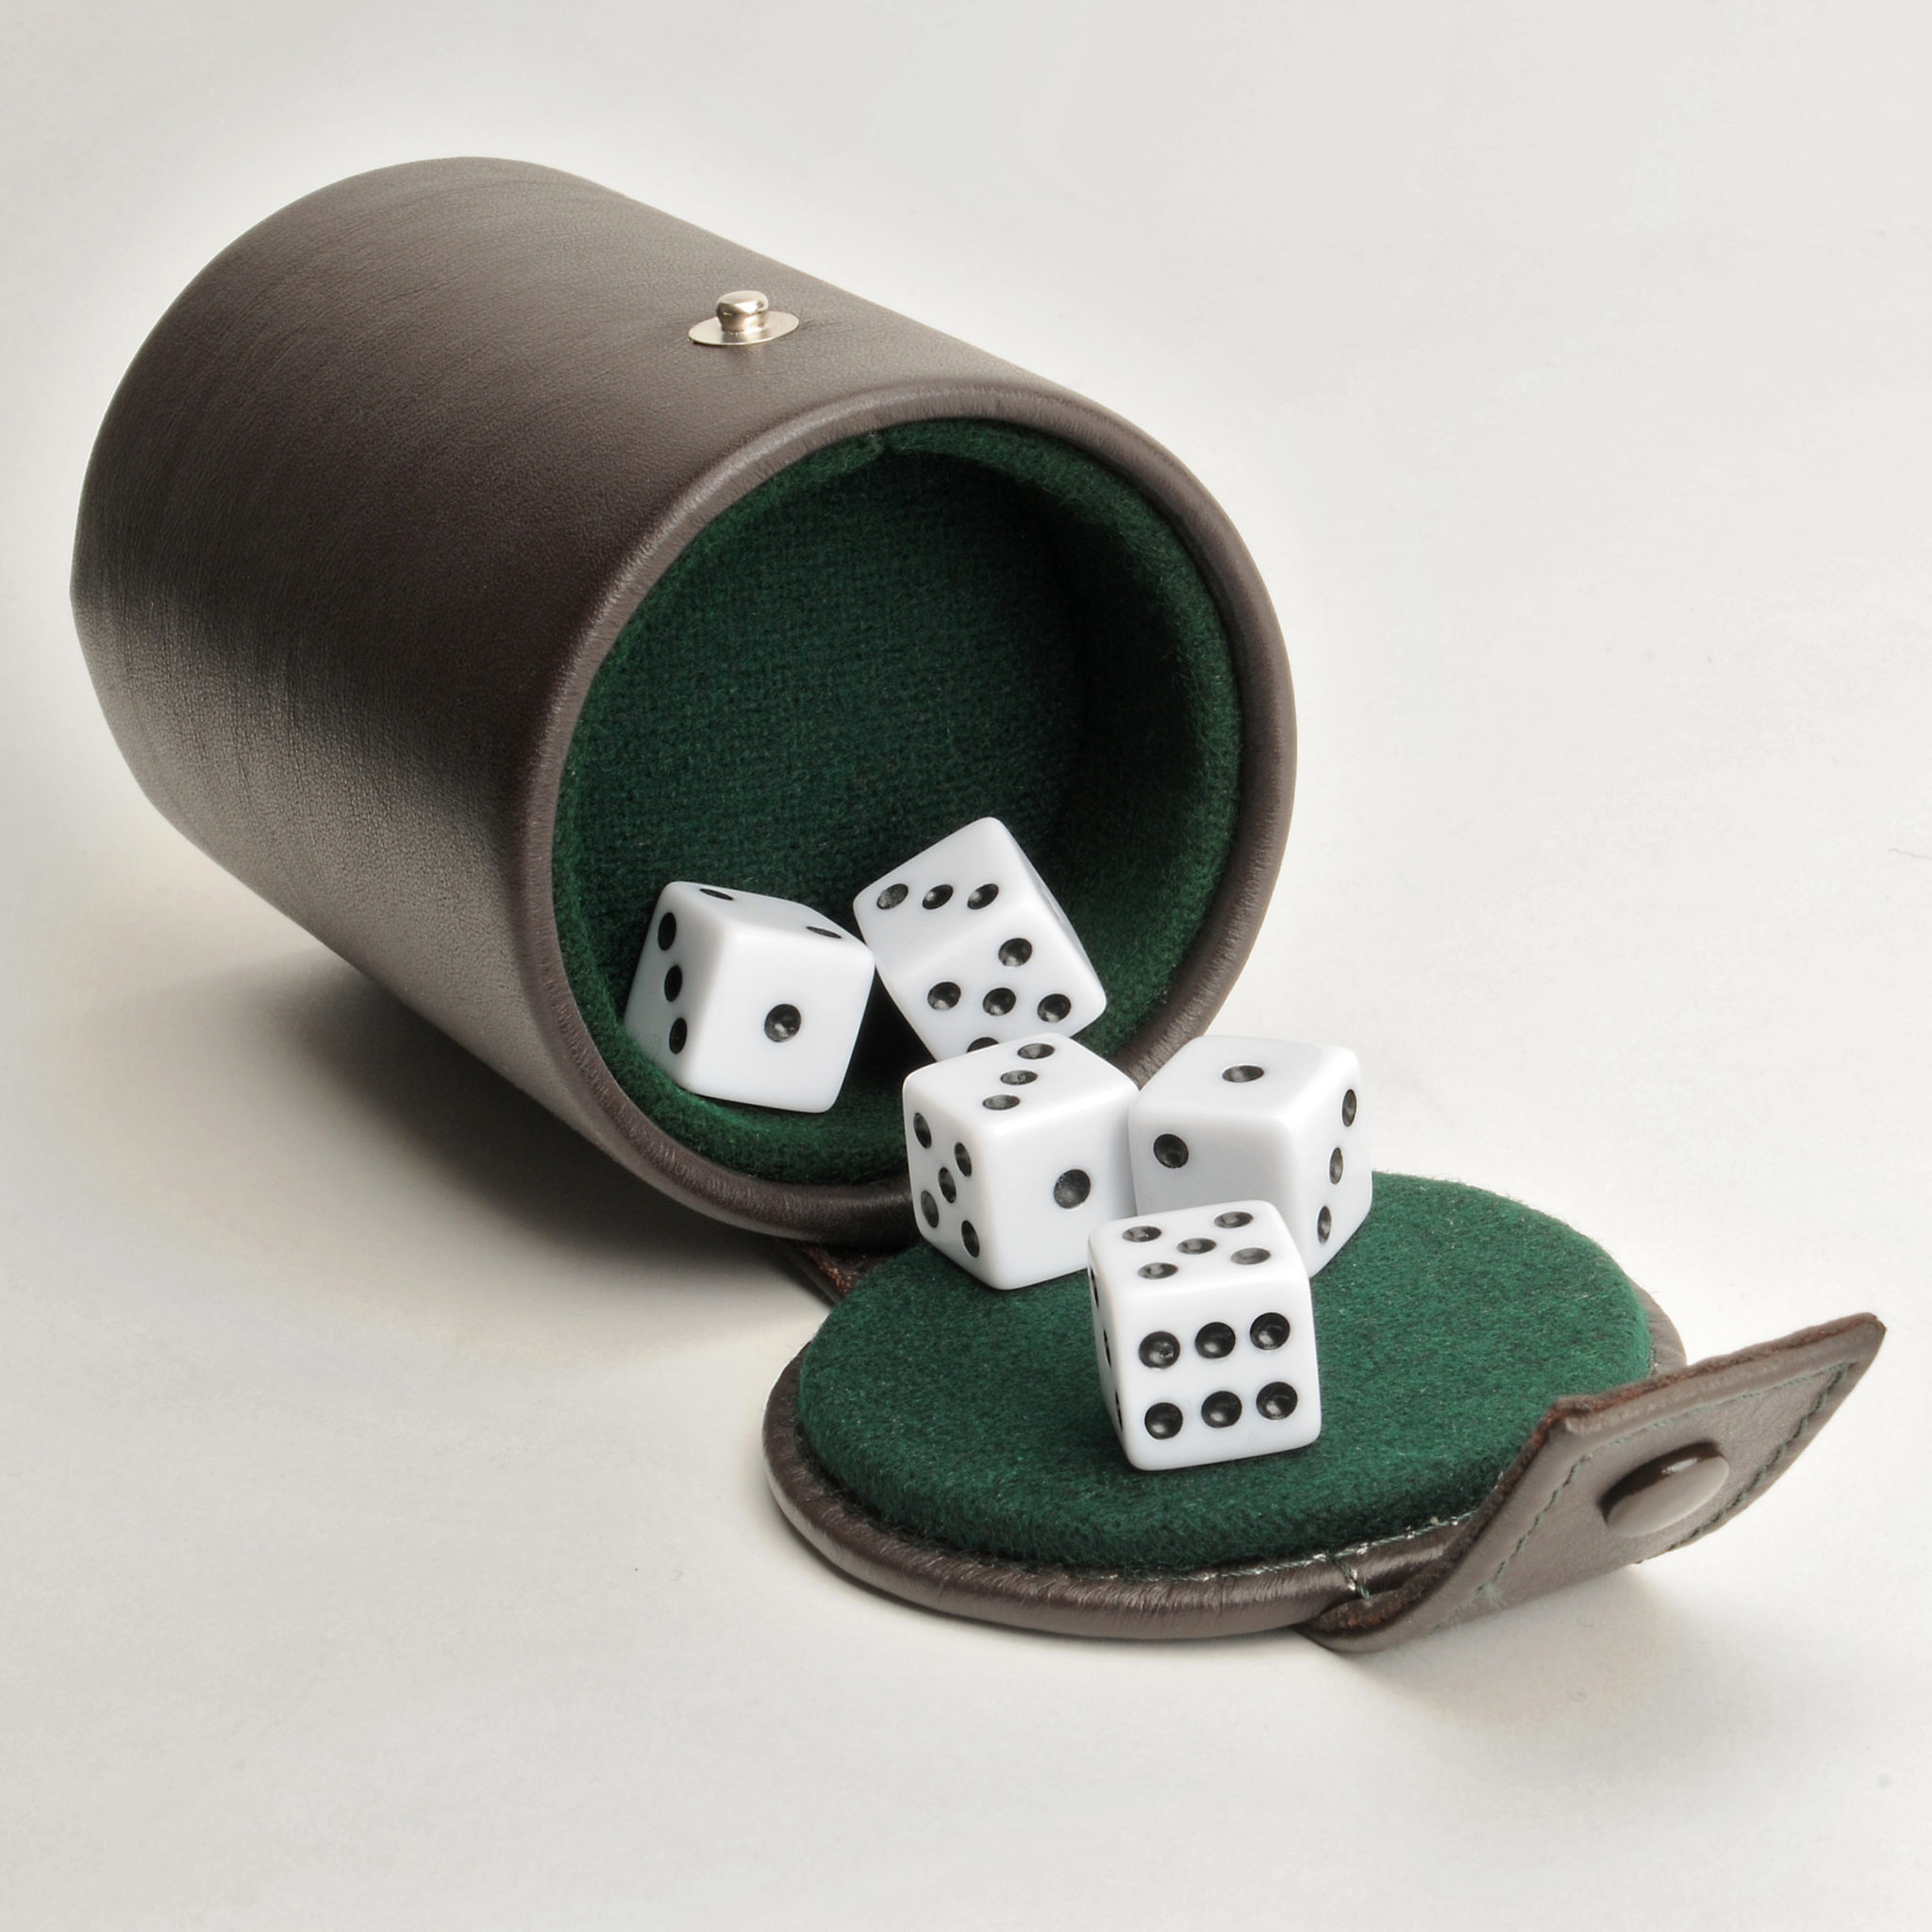 5 Engraved Poker Dice Heineken Dice Cup with Storage Compartment